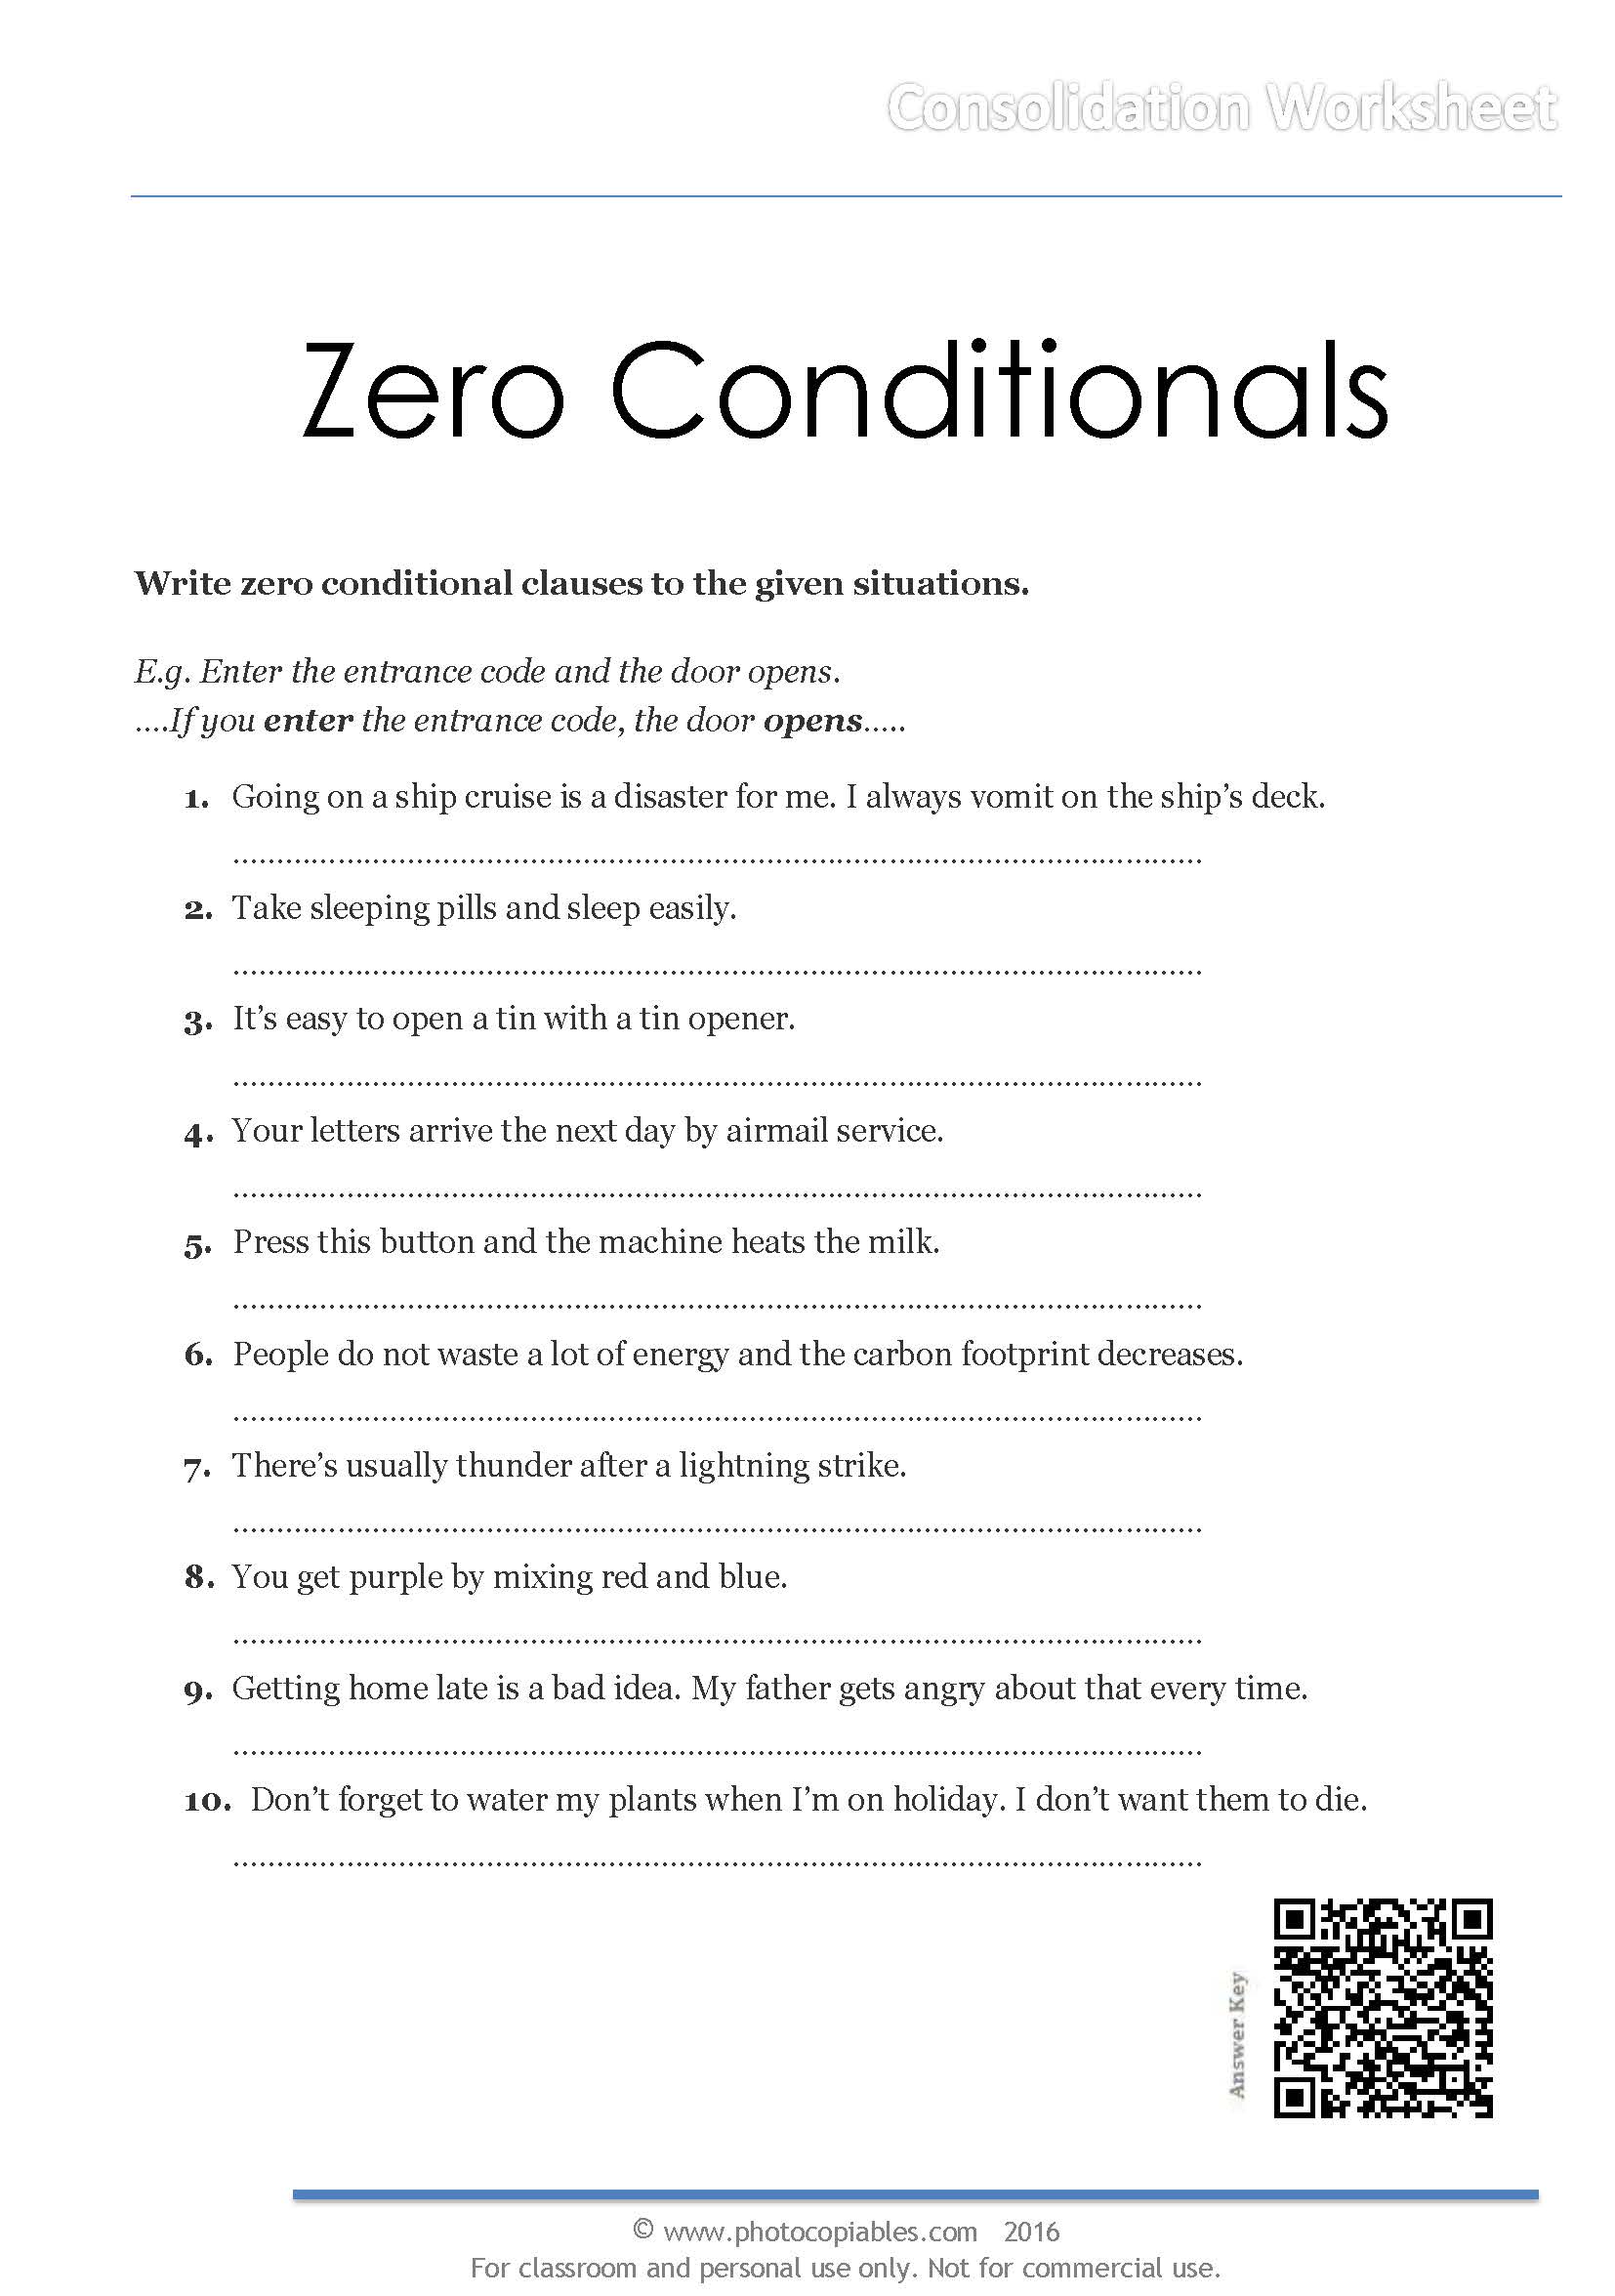 zero-conditionals-consolidation-worksheet-photocopiables